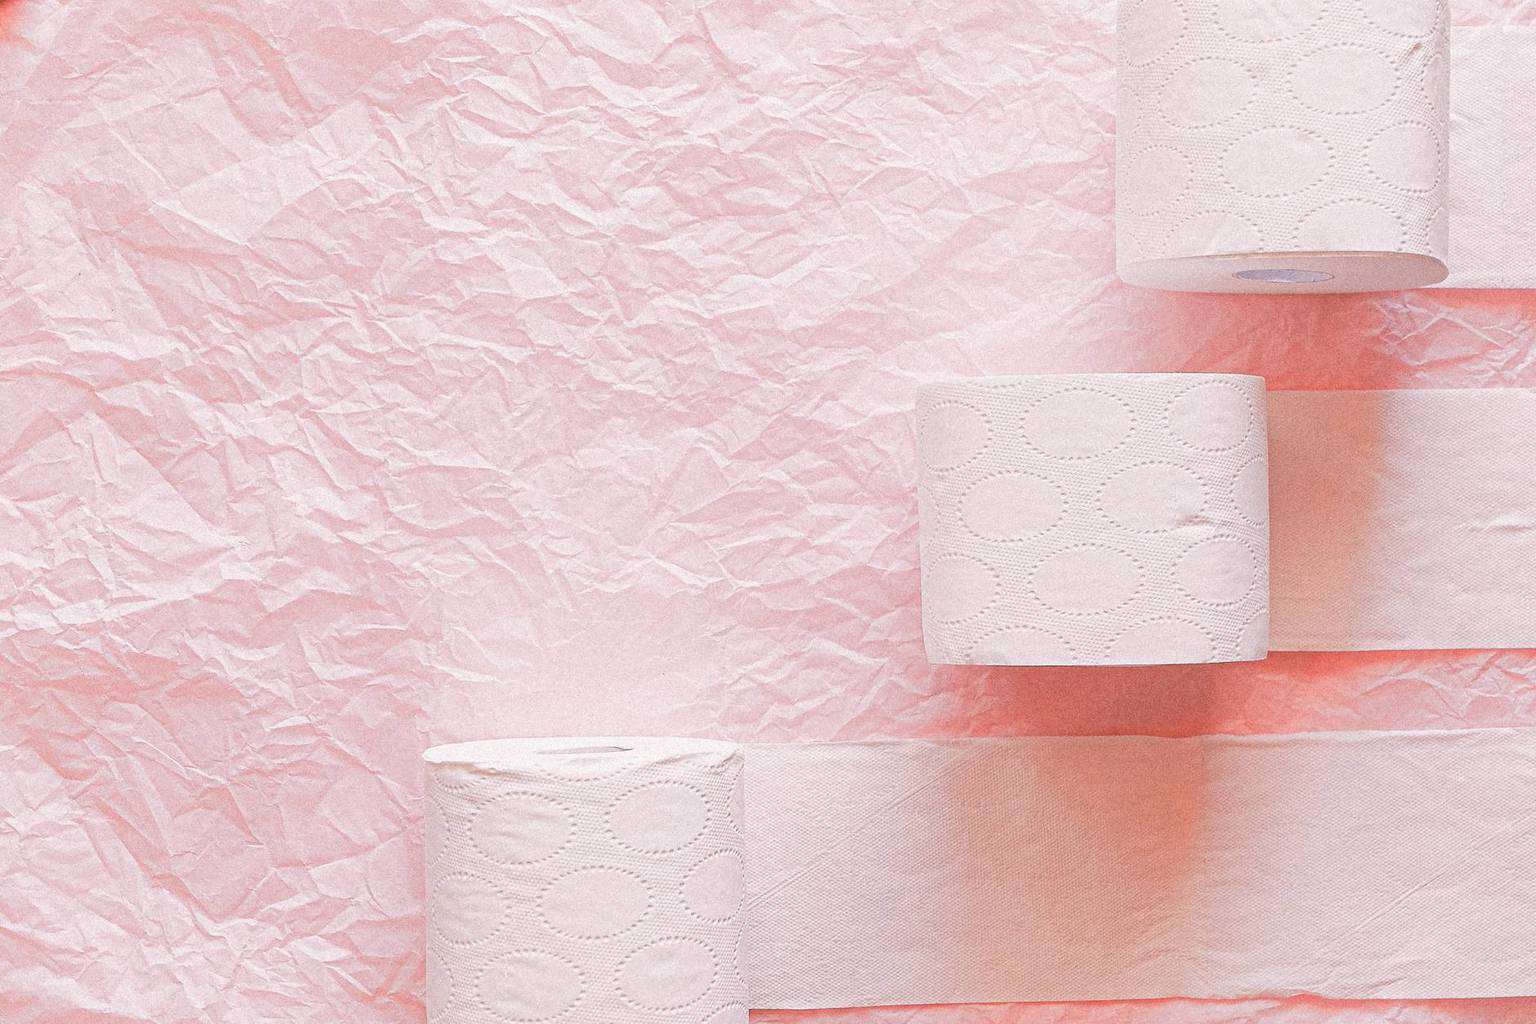 white toilet paper roll on pink textile